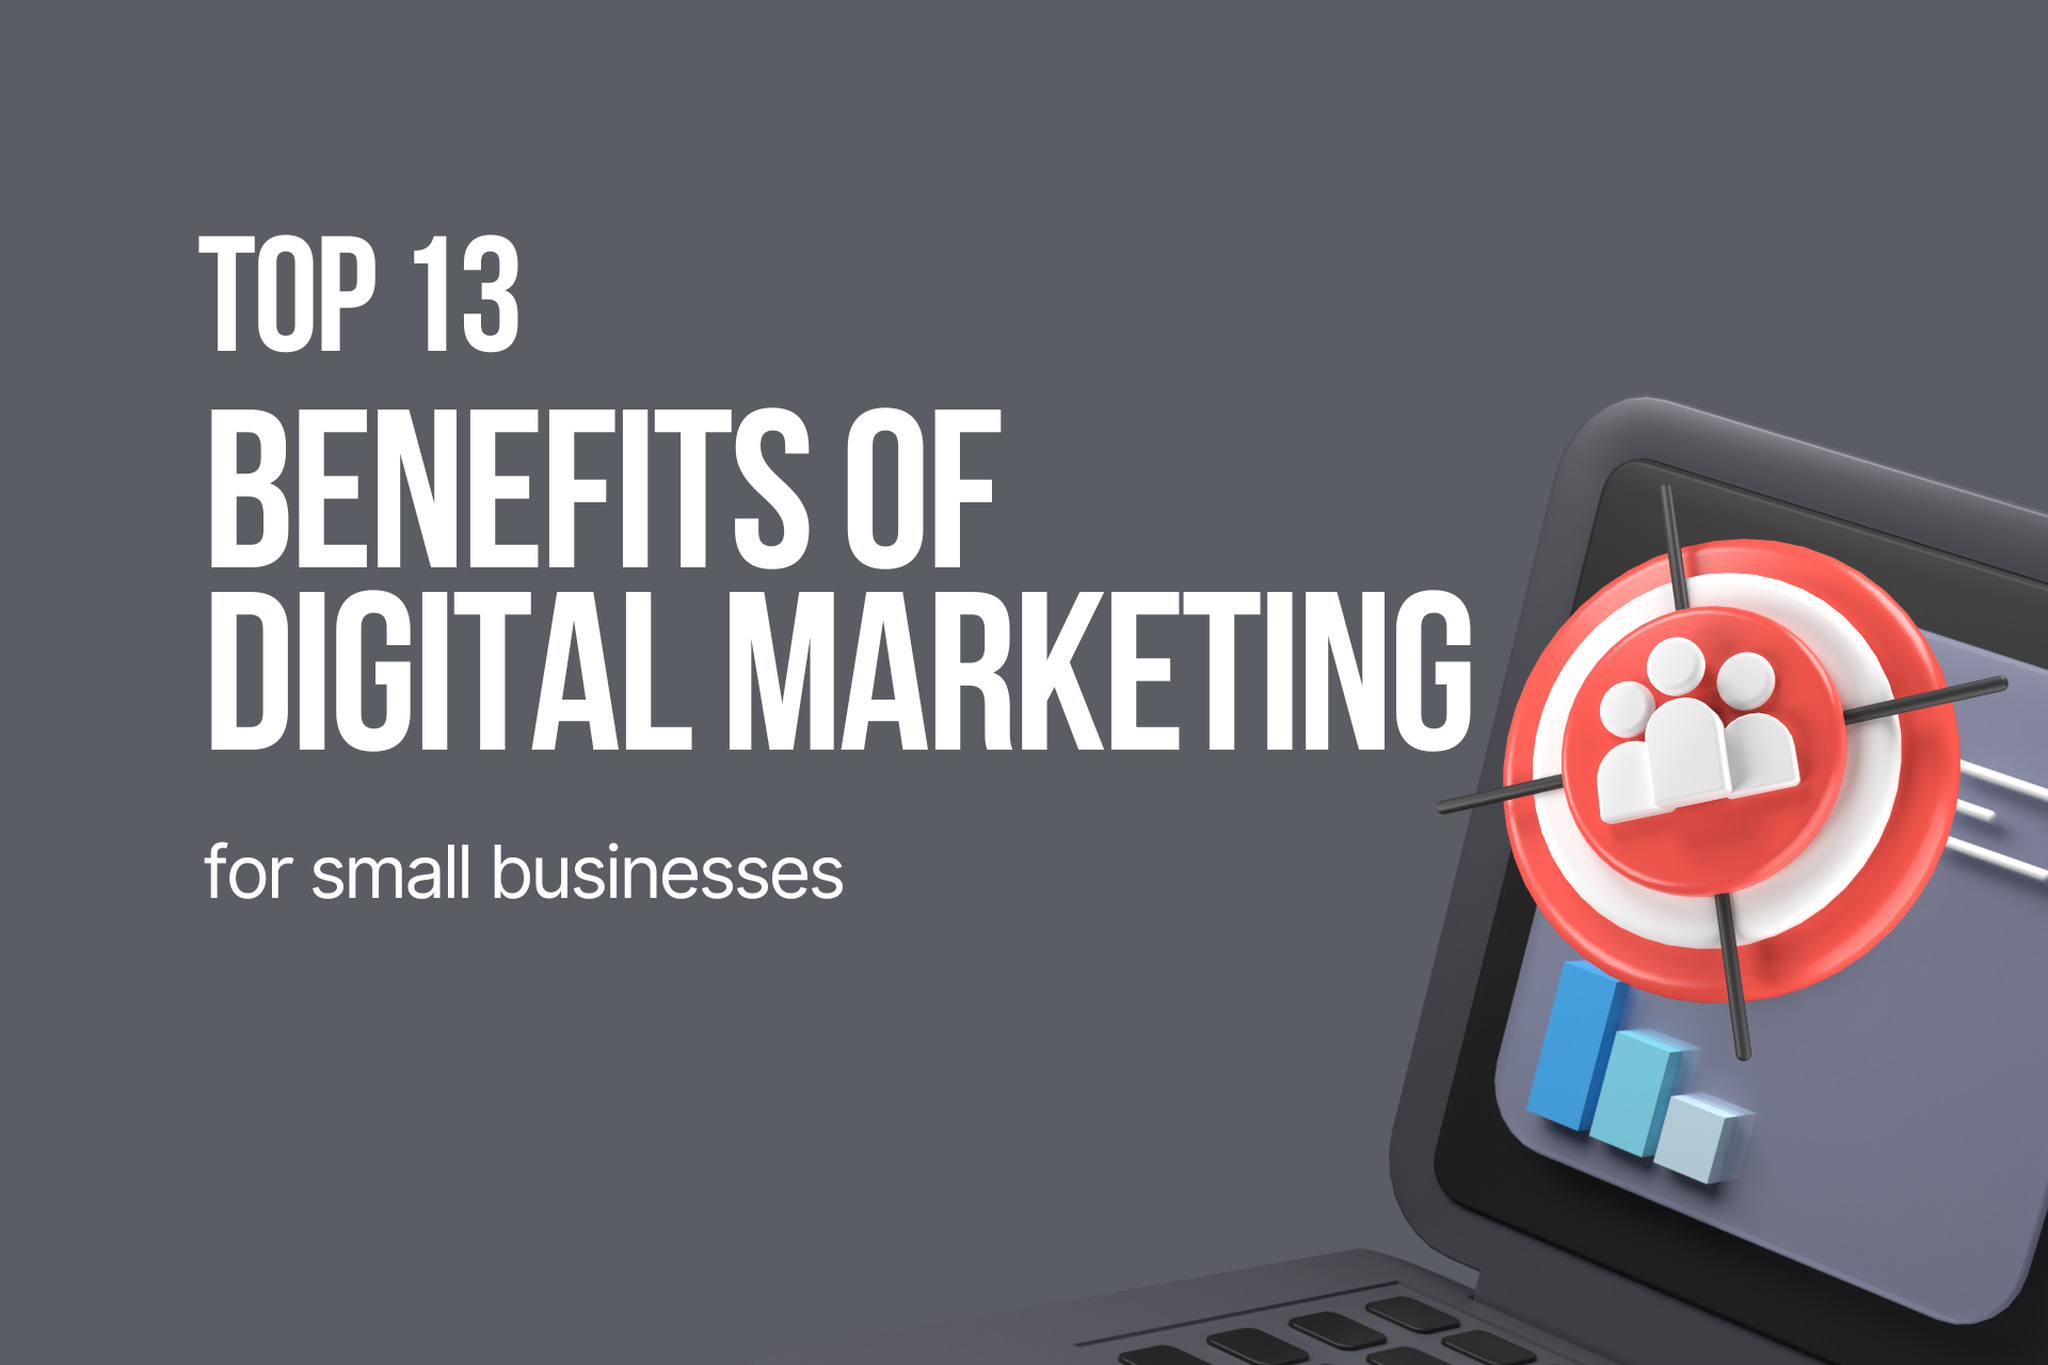 Top 13 Benefits of Digital Marketing for Small Businesses